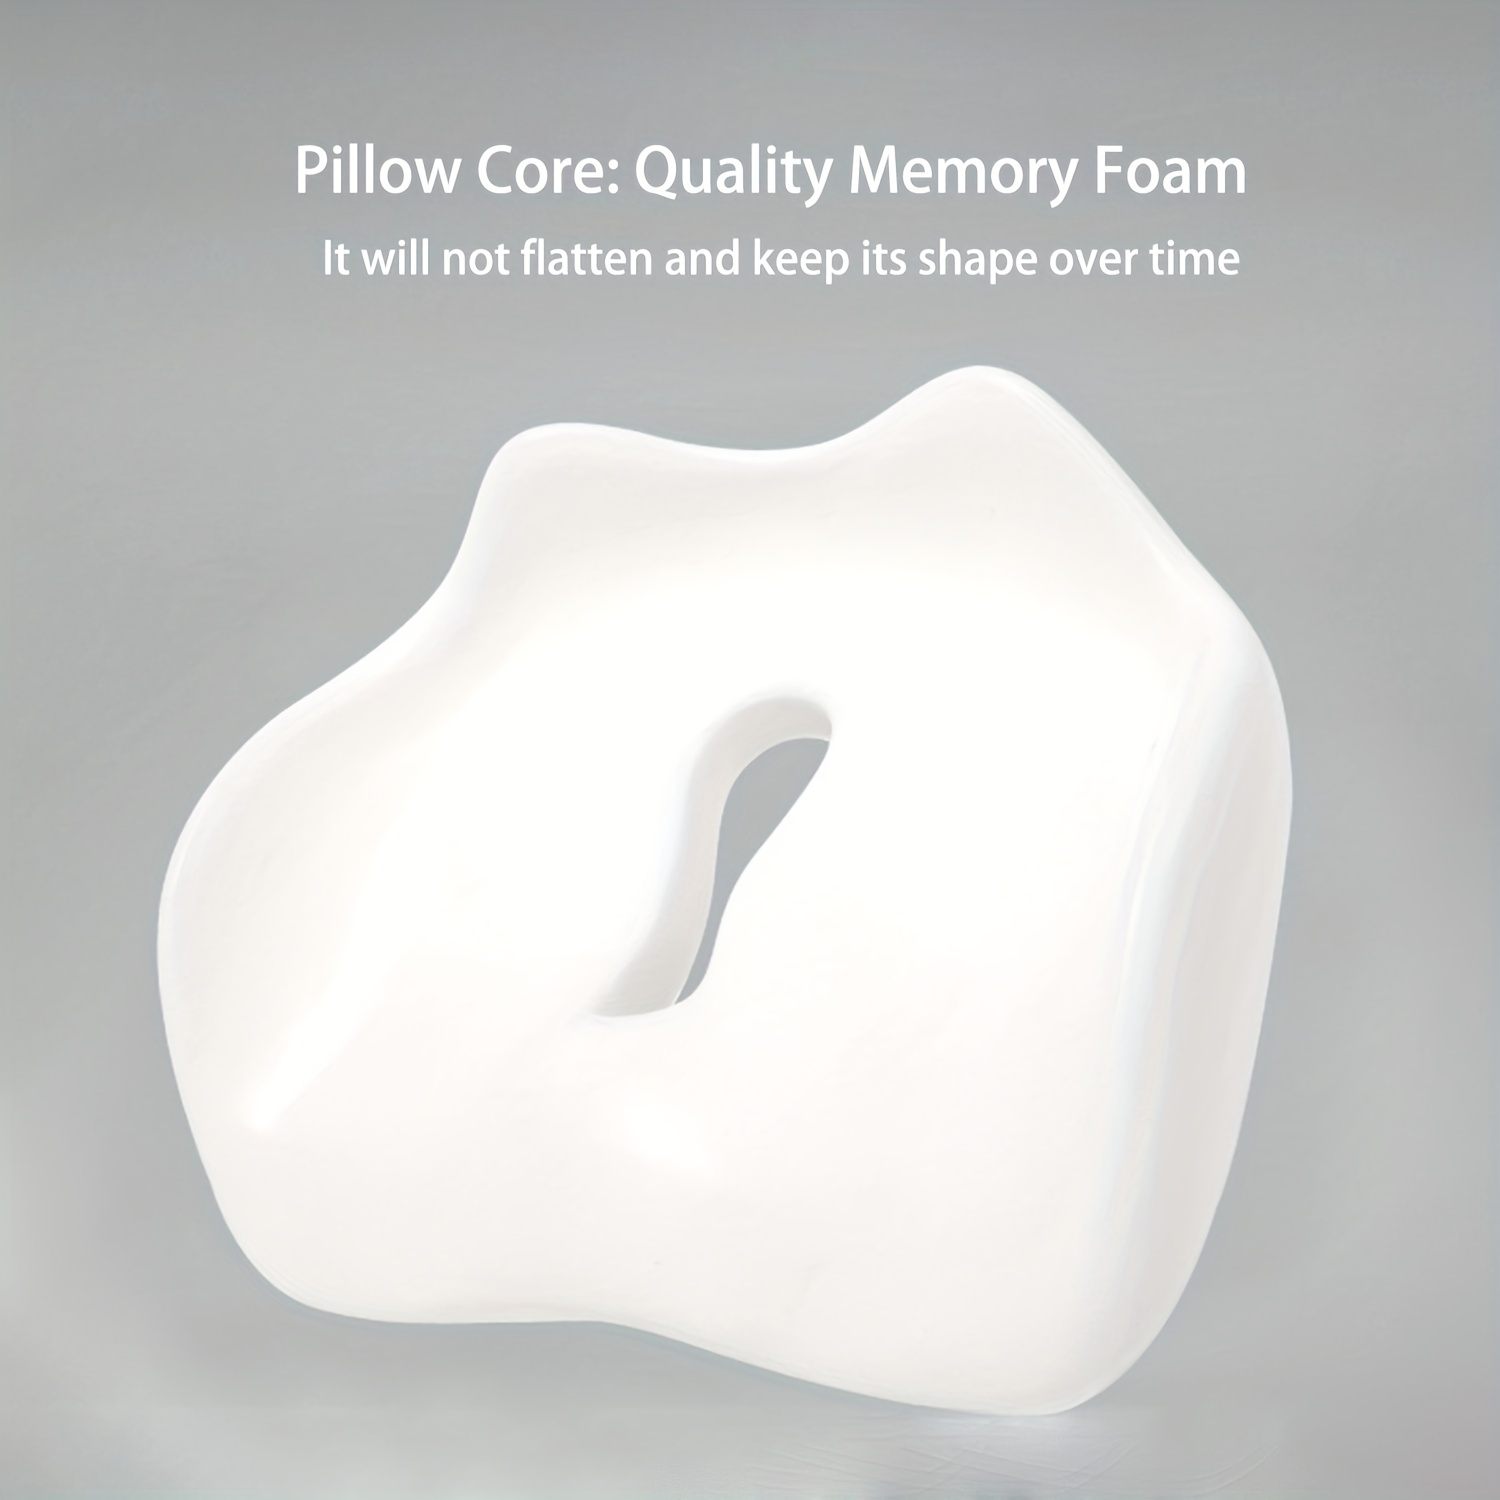 Highly Recommended Donut shaped Coccyx Tailbone Seat & Chair